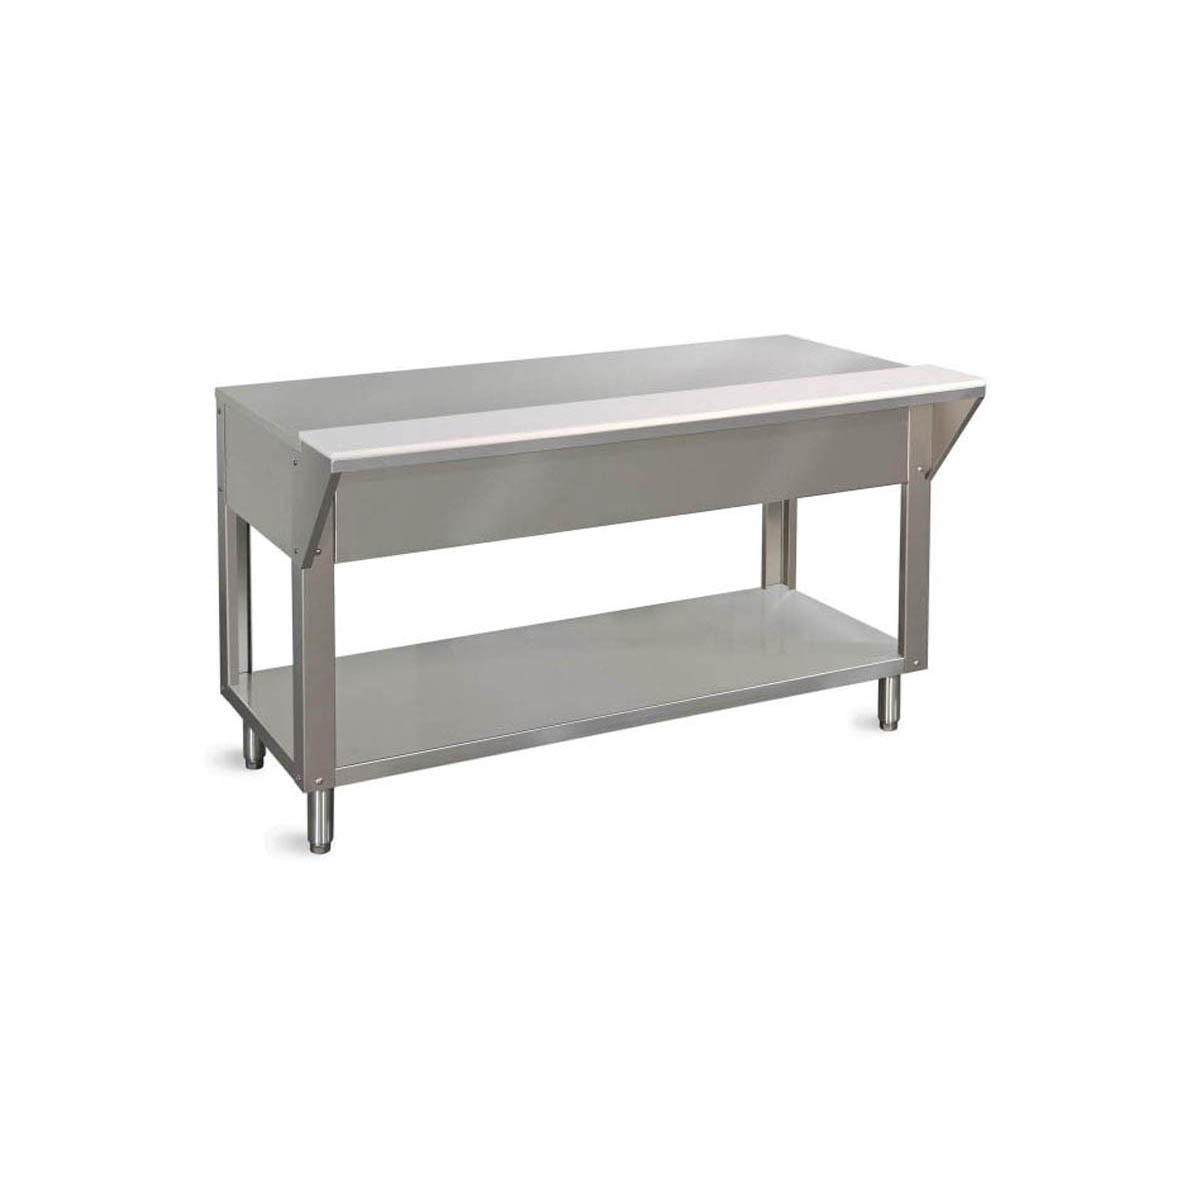 Piper Products DB-4-ST Utility Serving Counter